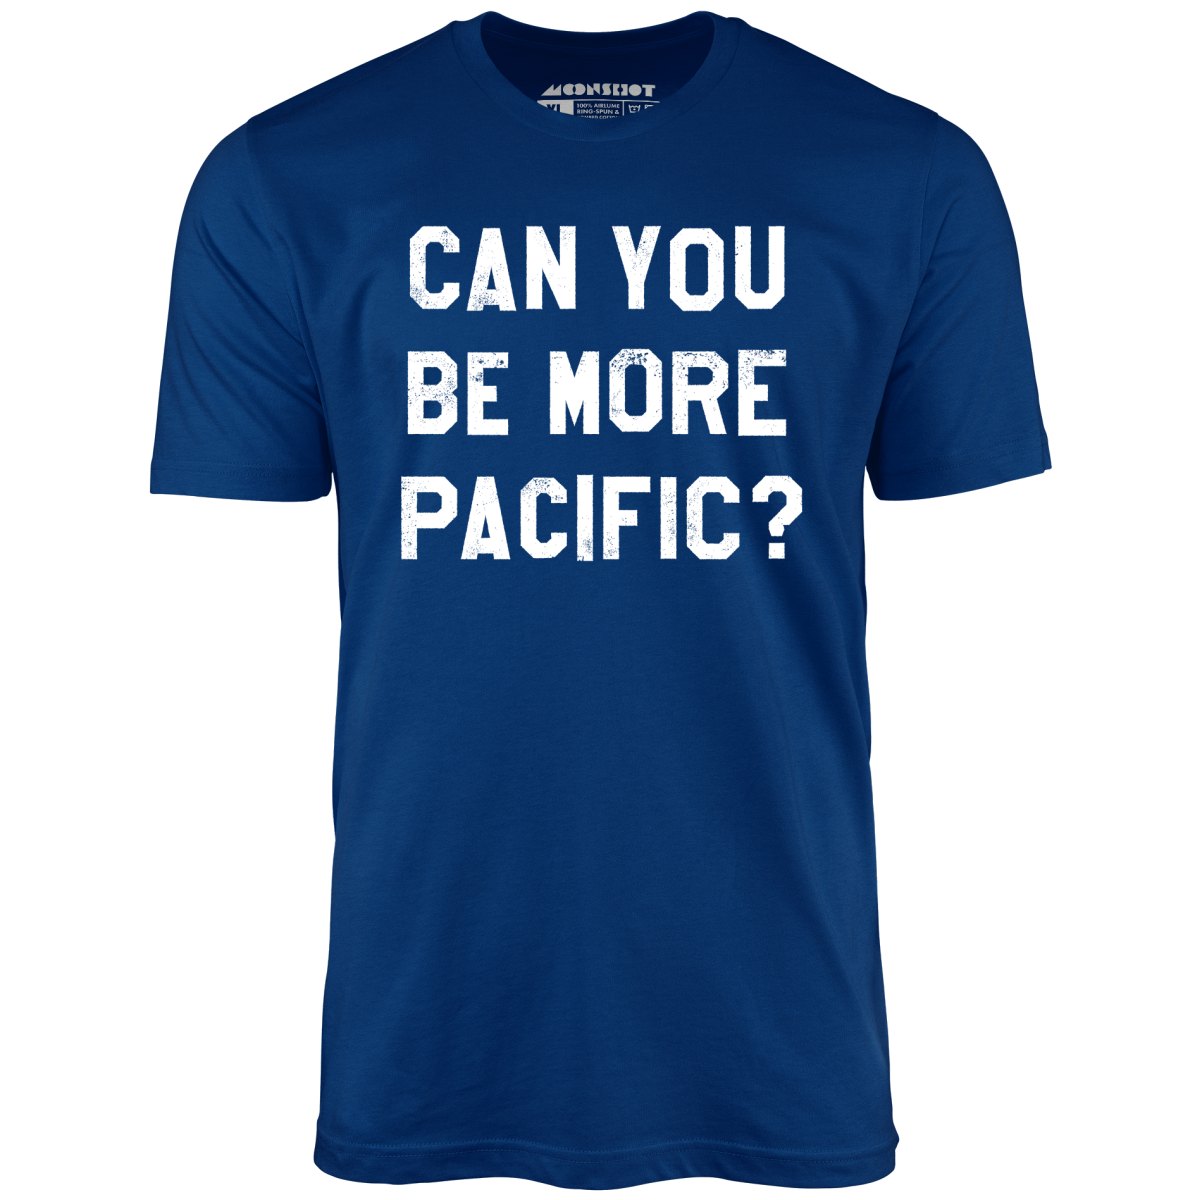 Can You Be More Pacific? - Unisex T-Shirt